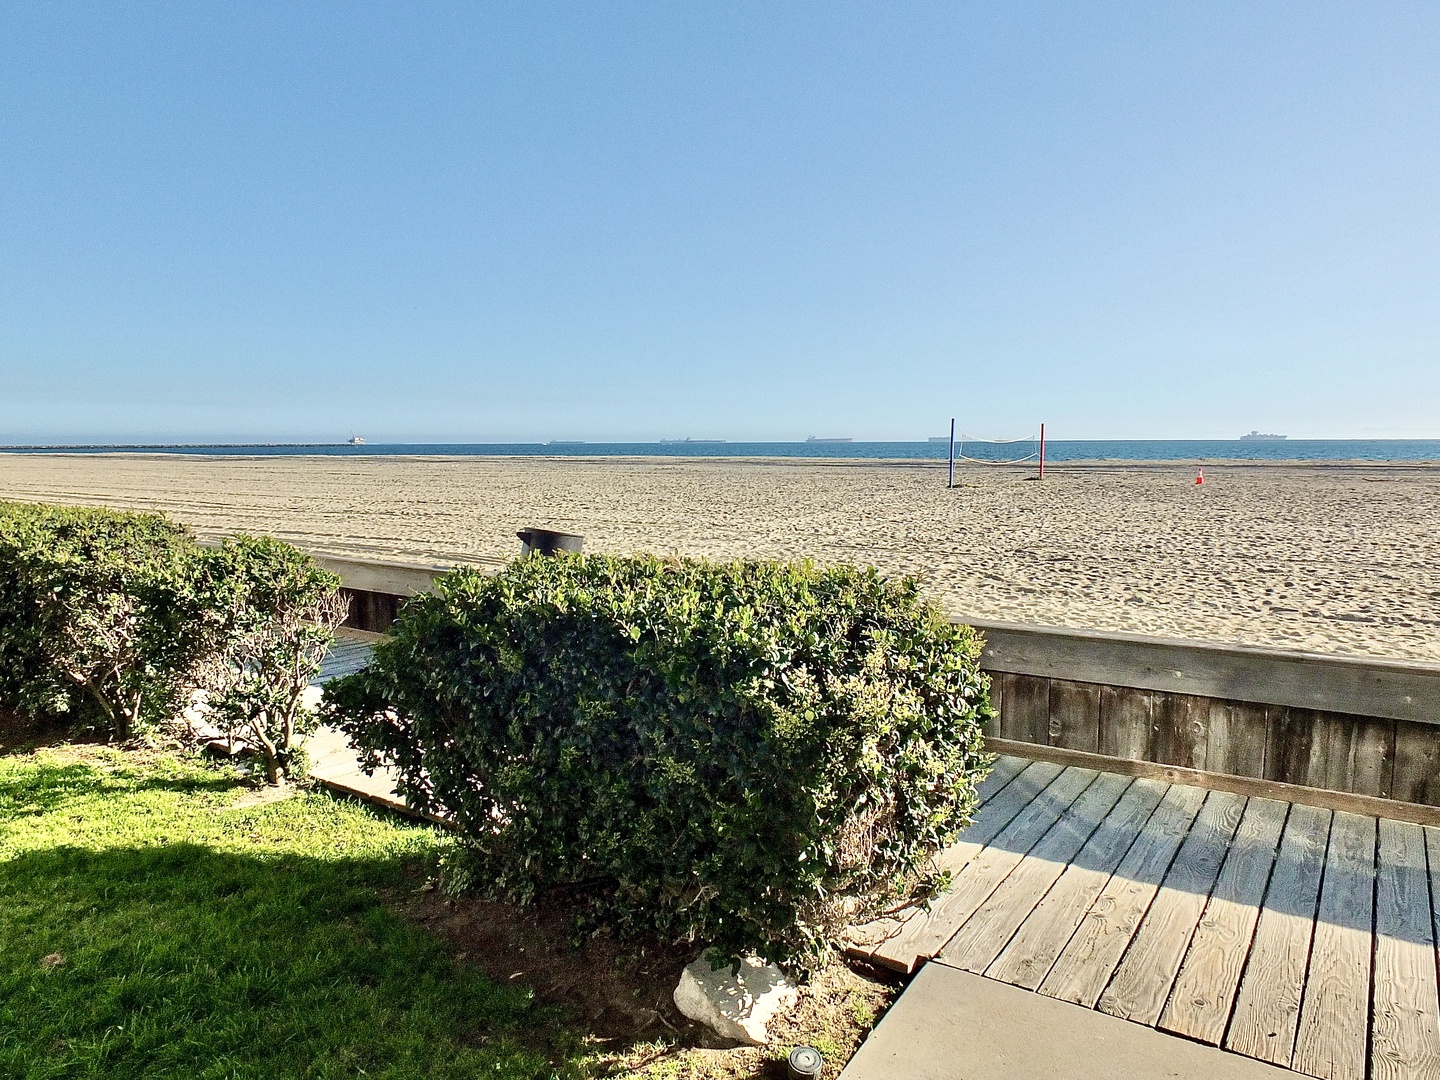 Sandy shores & water views are just a short stroll away!